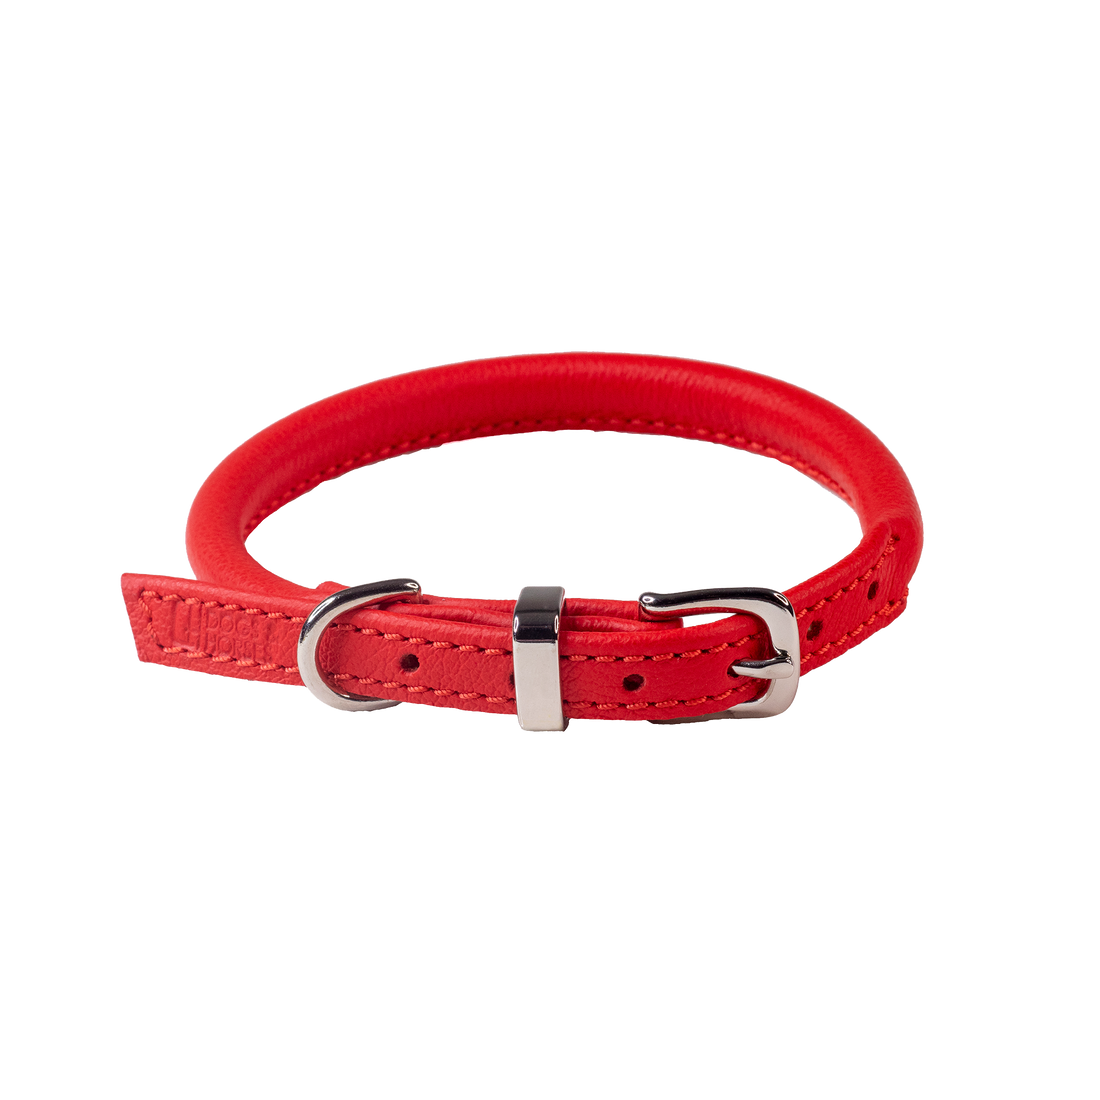 The rolled leather collar is ideal for dogs with long or curly coats. The rolled construction helps to prevent knots forming in the coat (lookin&